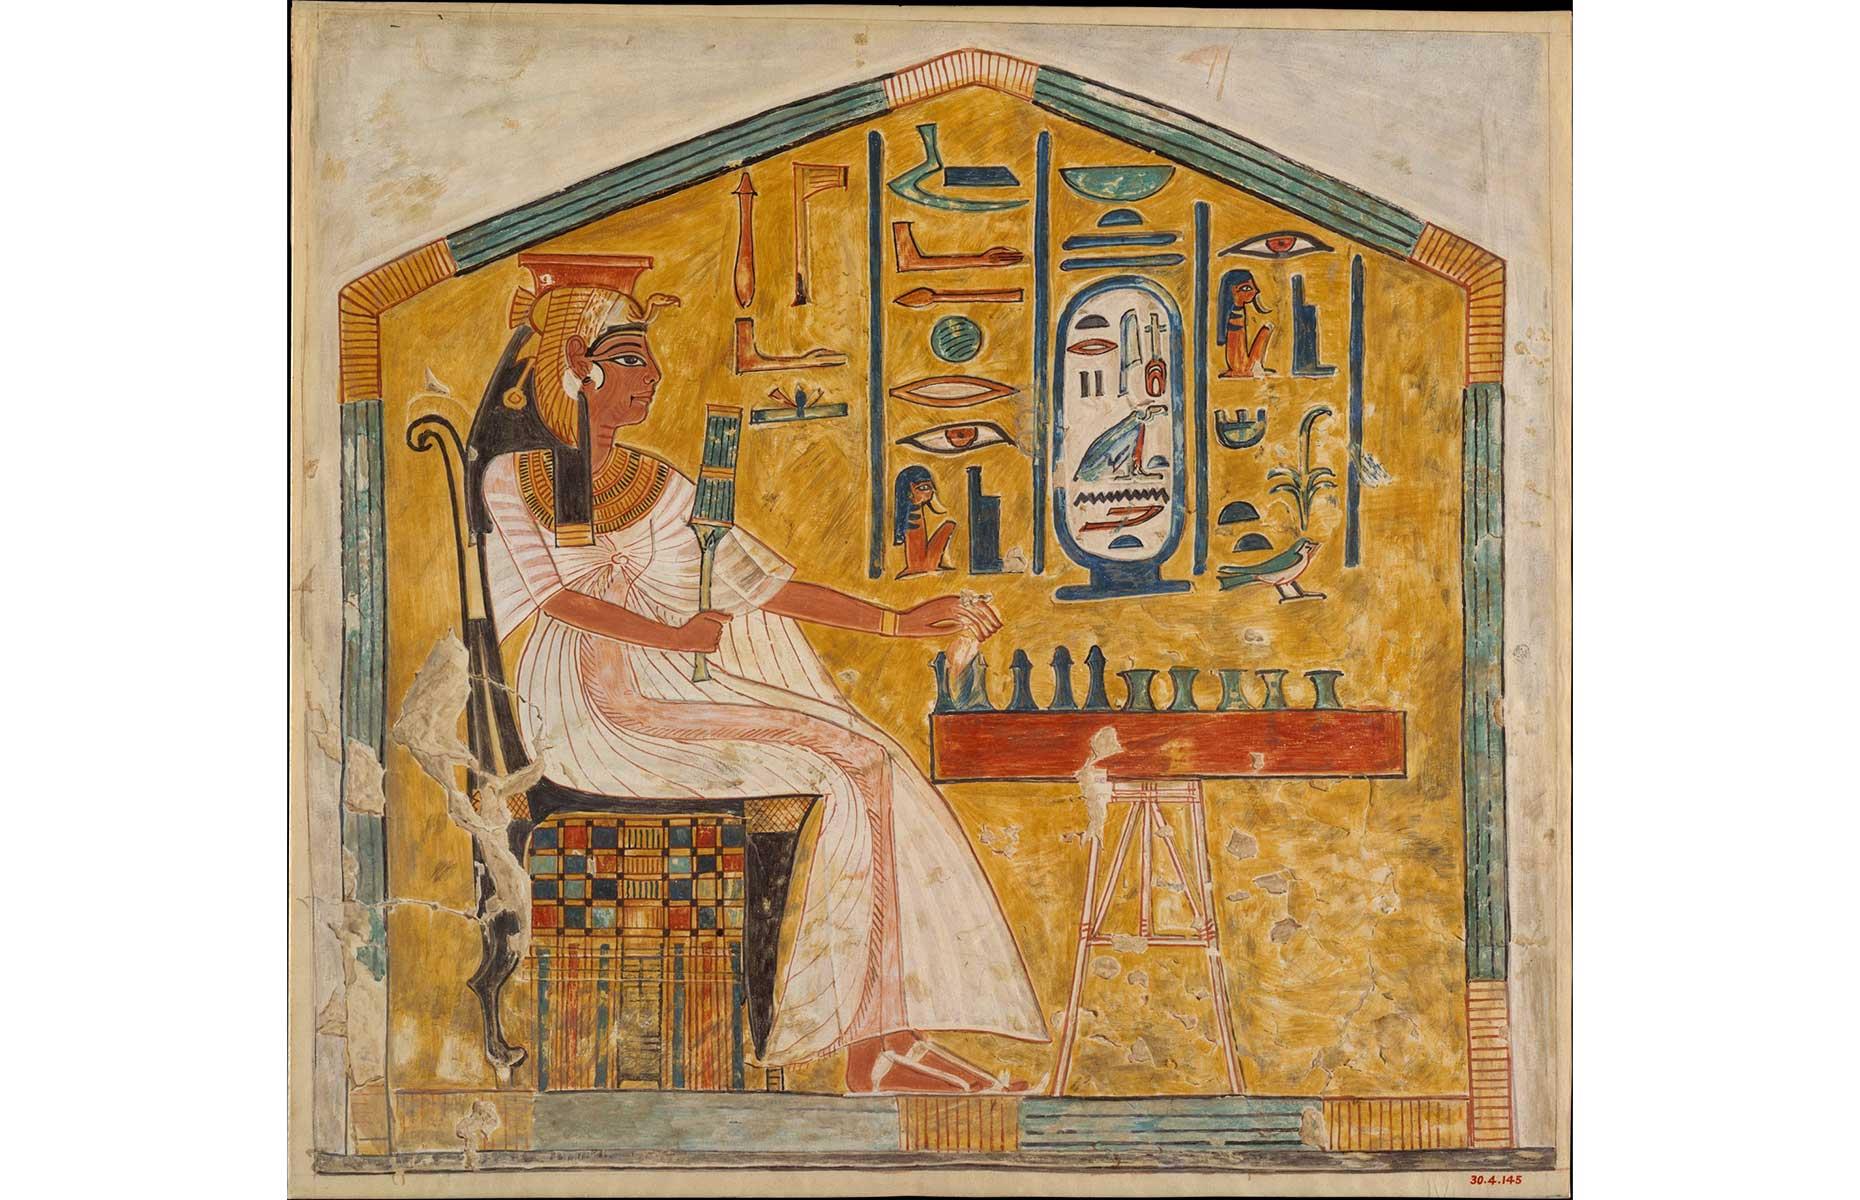 <p>This colourful painting of Queen Nefertari was found in her tomb in the Valley of the Queens in Luxor (ancient Thebes). The royal lady was buried in a small rock-cut temple and is depicted here playing a popular ancient Egyptian game called 'senet'. The game had symbolic meaning; senet meant 'passing', and it was seen as a parallel for the journey into the afterlife.</p>